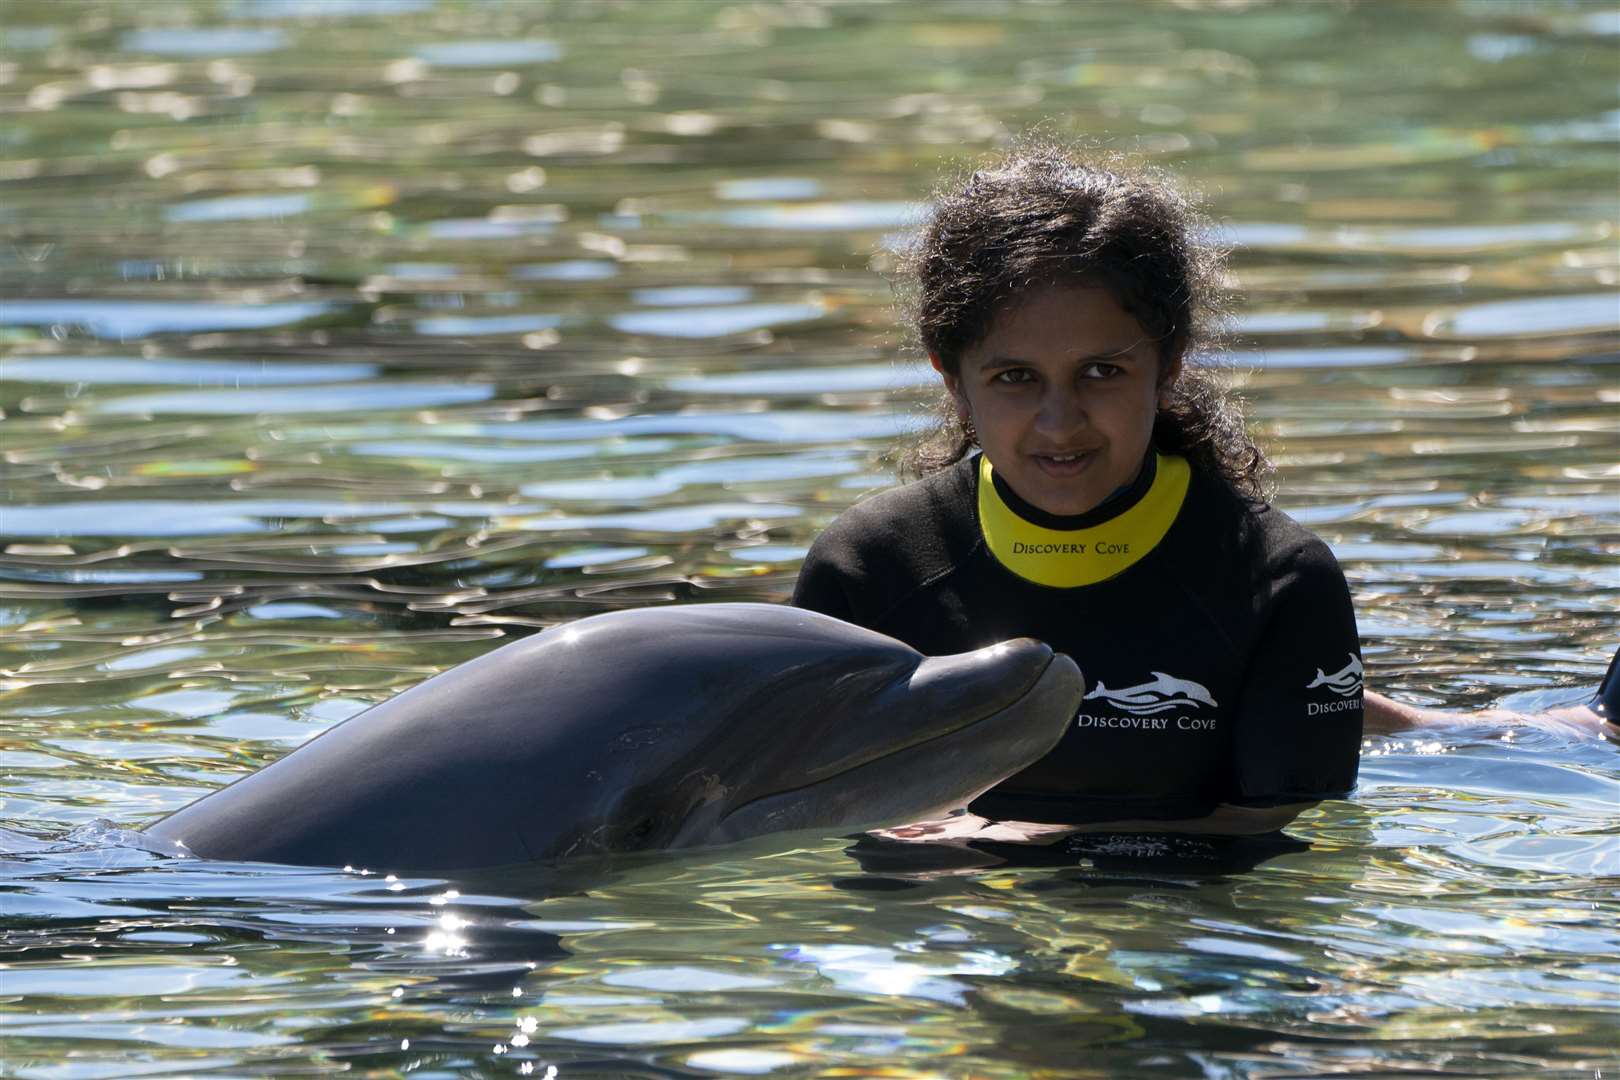 Safa Thagia said swimming with dolphins was ‘the most amazing experience’ (Kirsty O’Connor/PA)